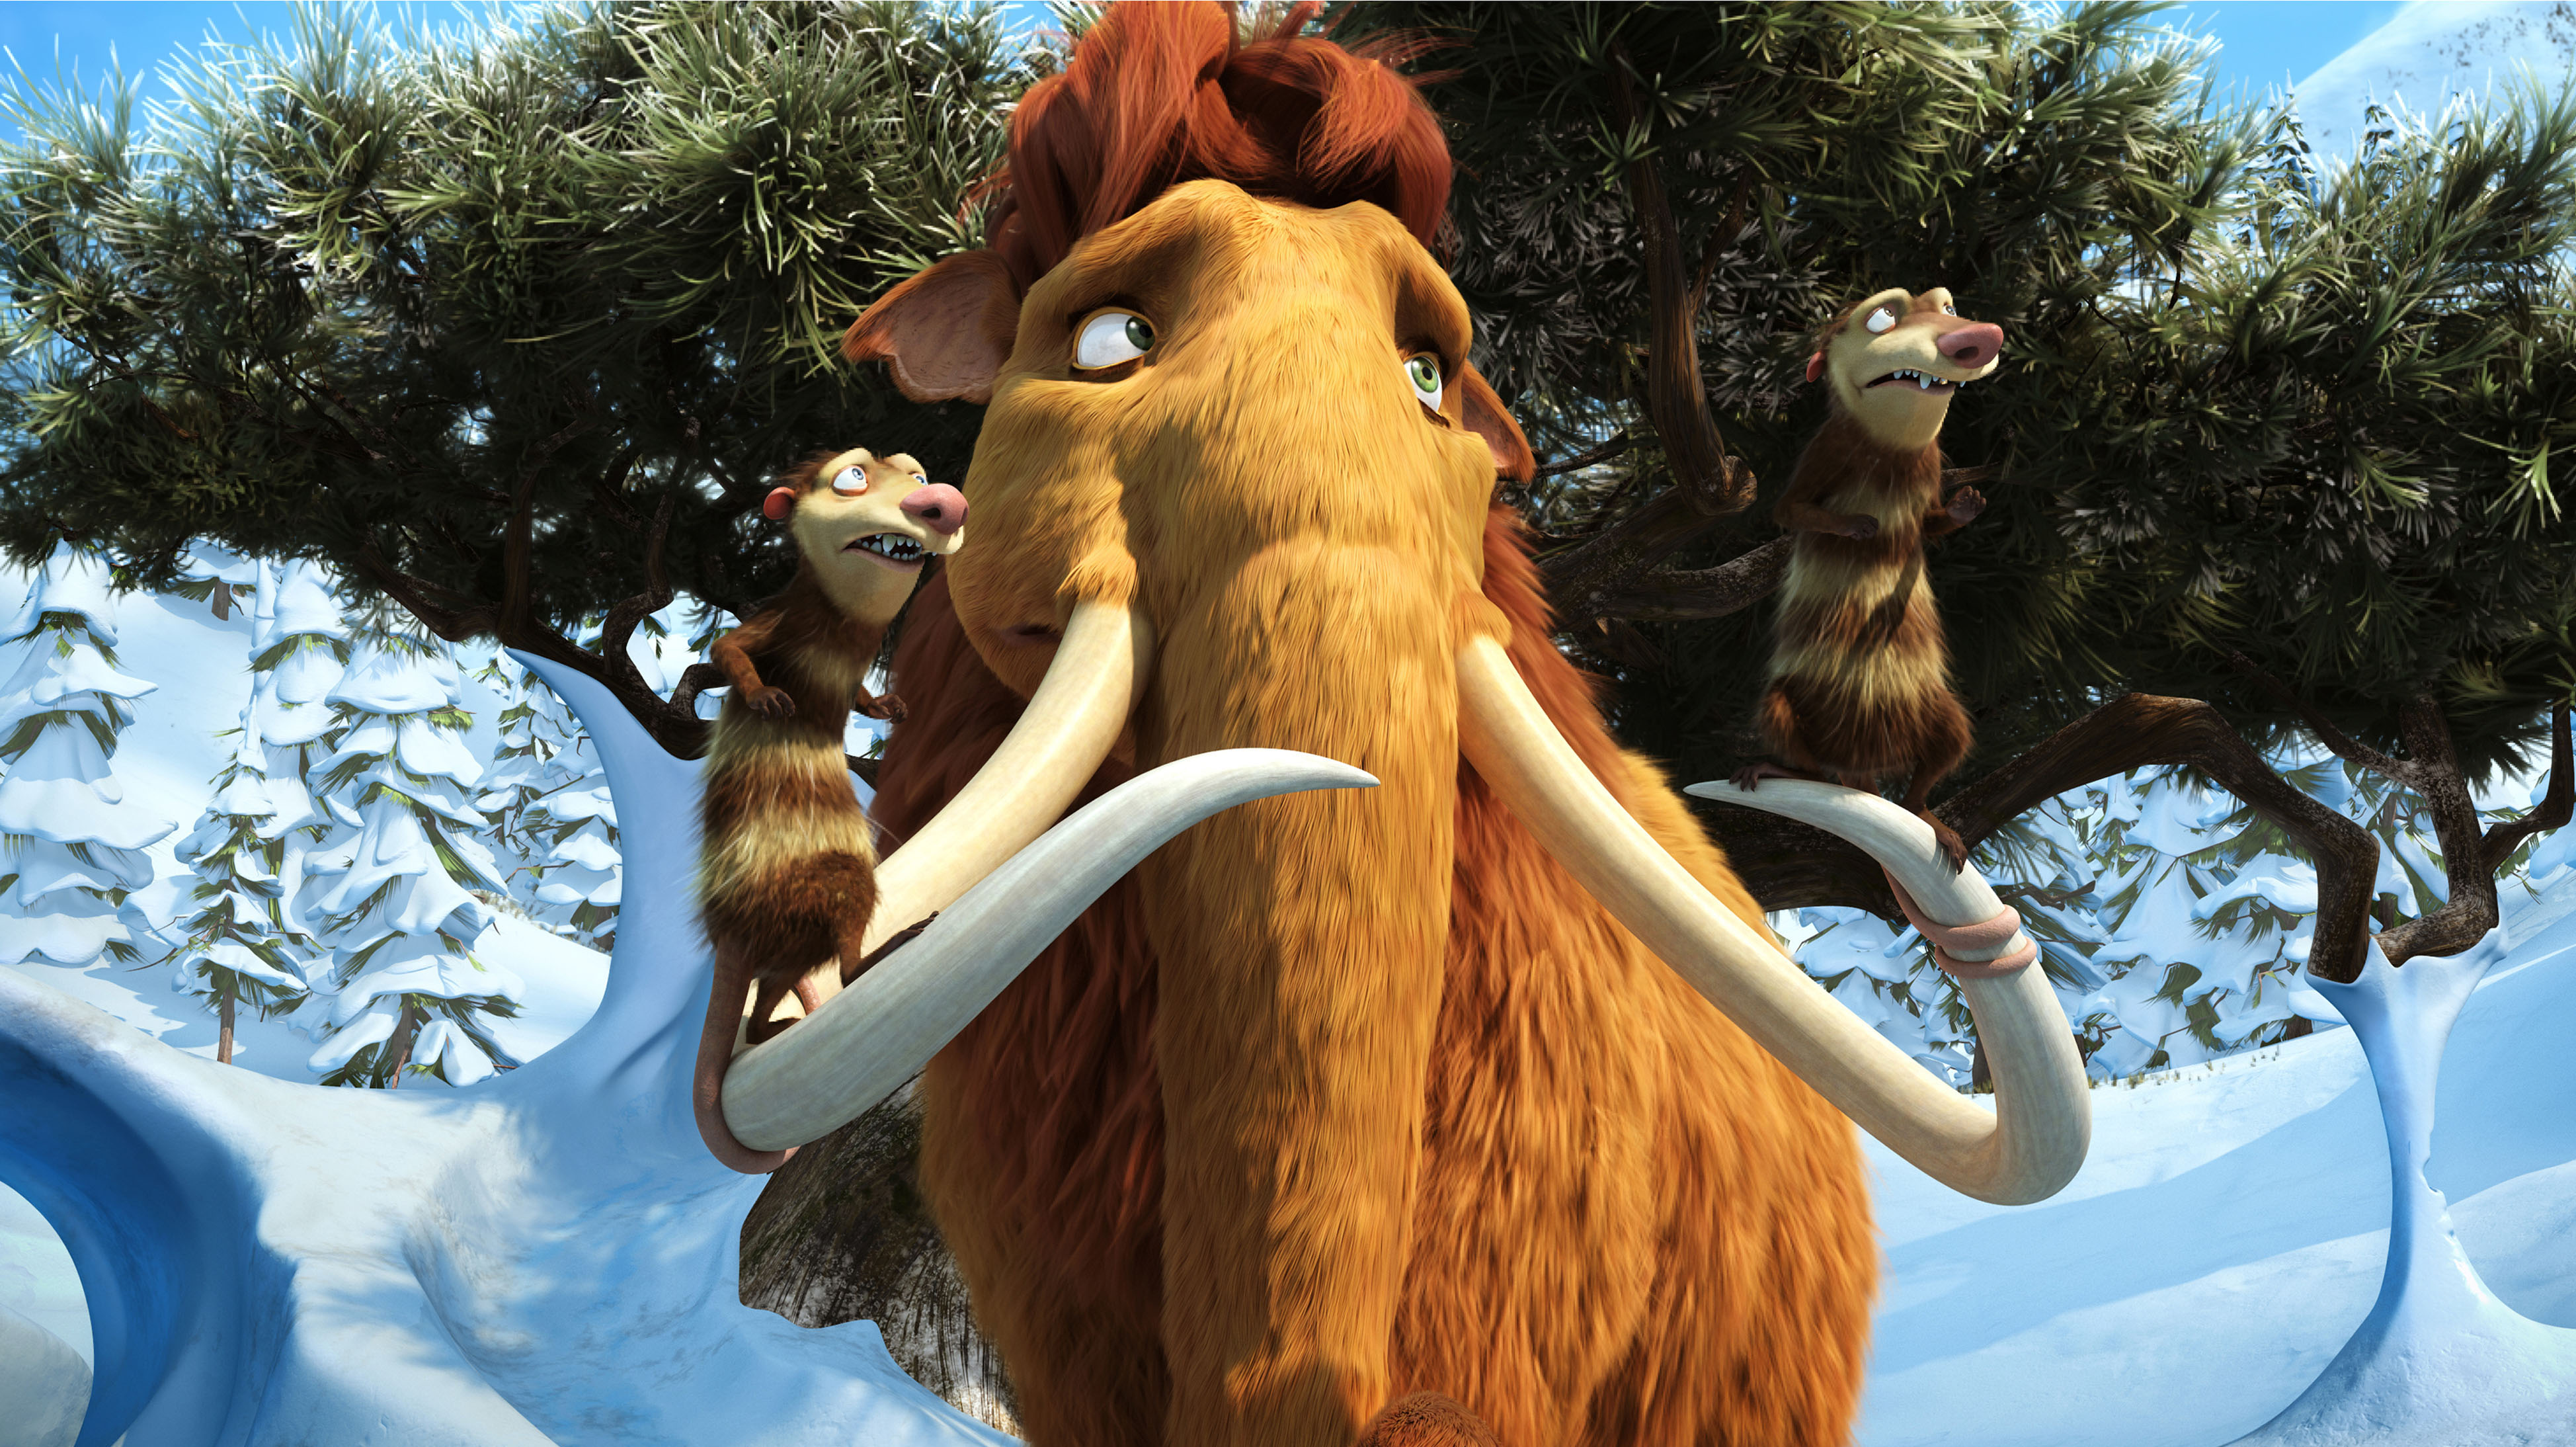 ice age, movie, ice age: dawn of the dinosaurs iphone wallpaper